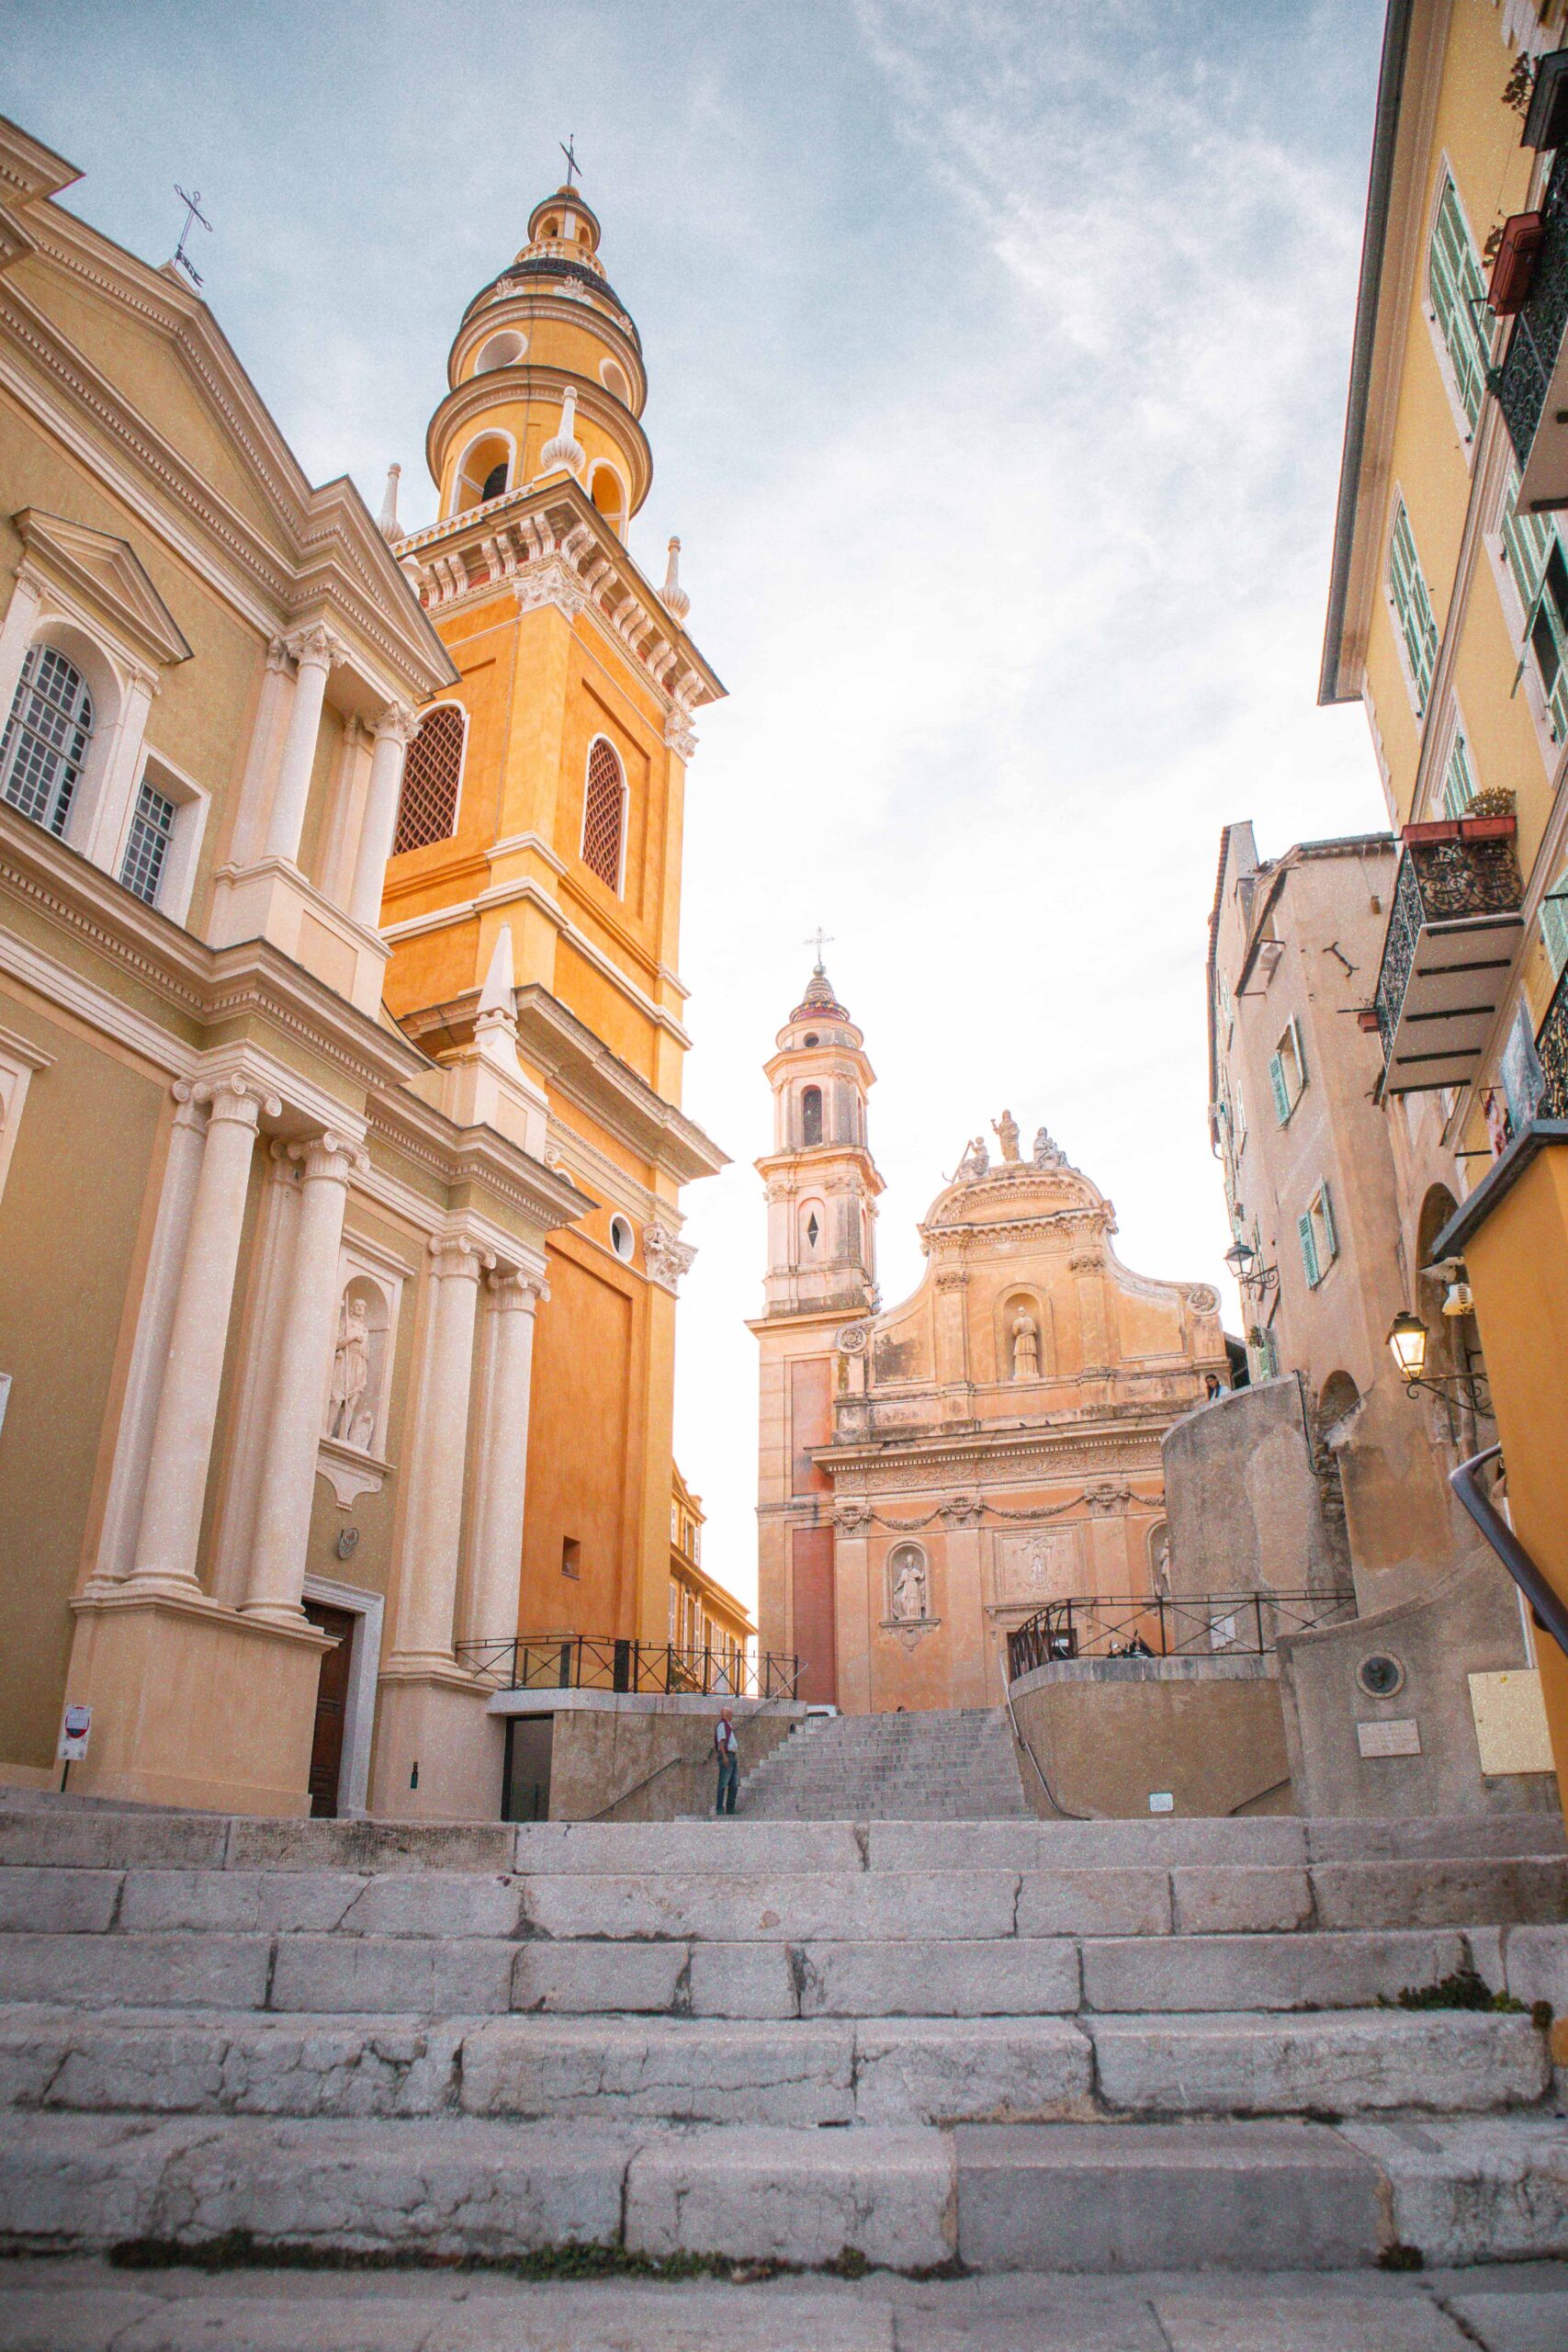 Place of the Saint Michael Archangel Basilica in the Old Town of Menton, France